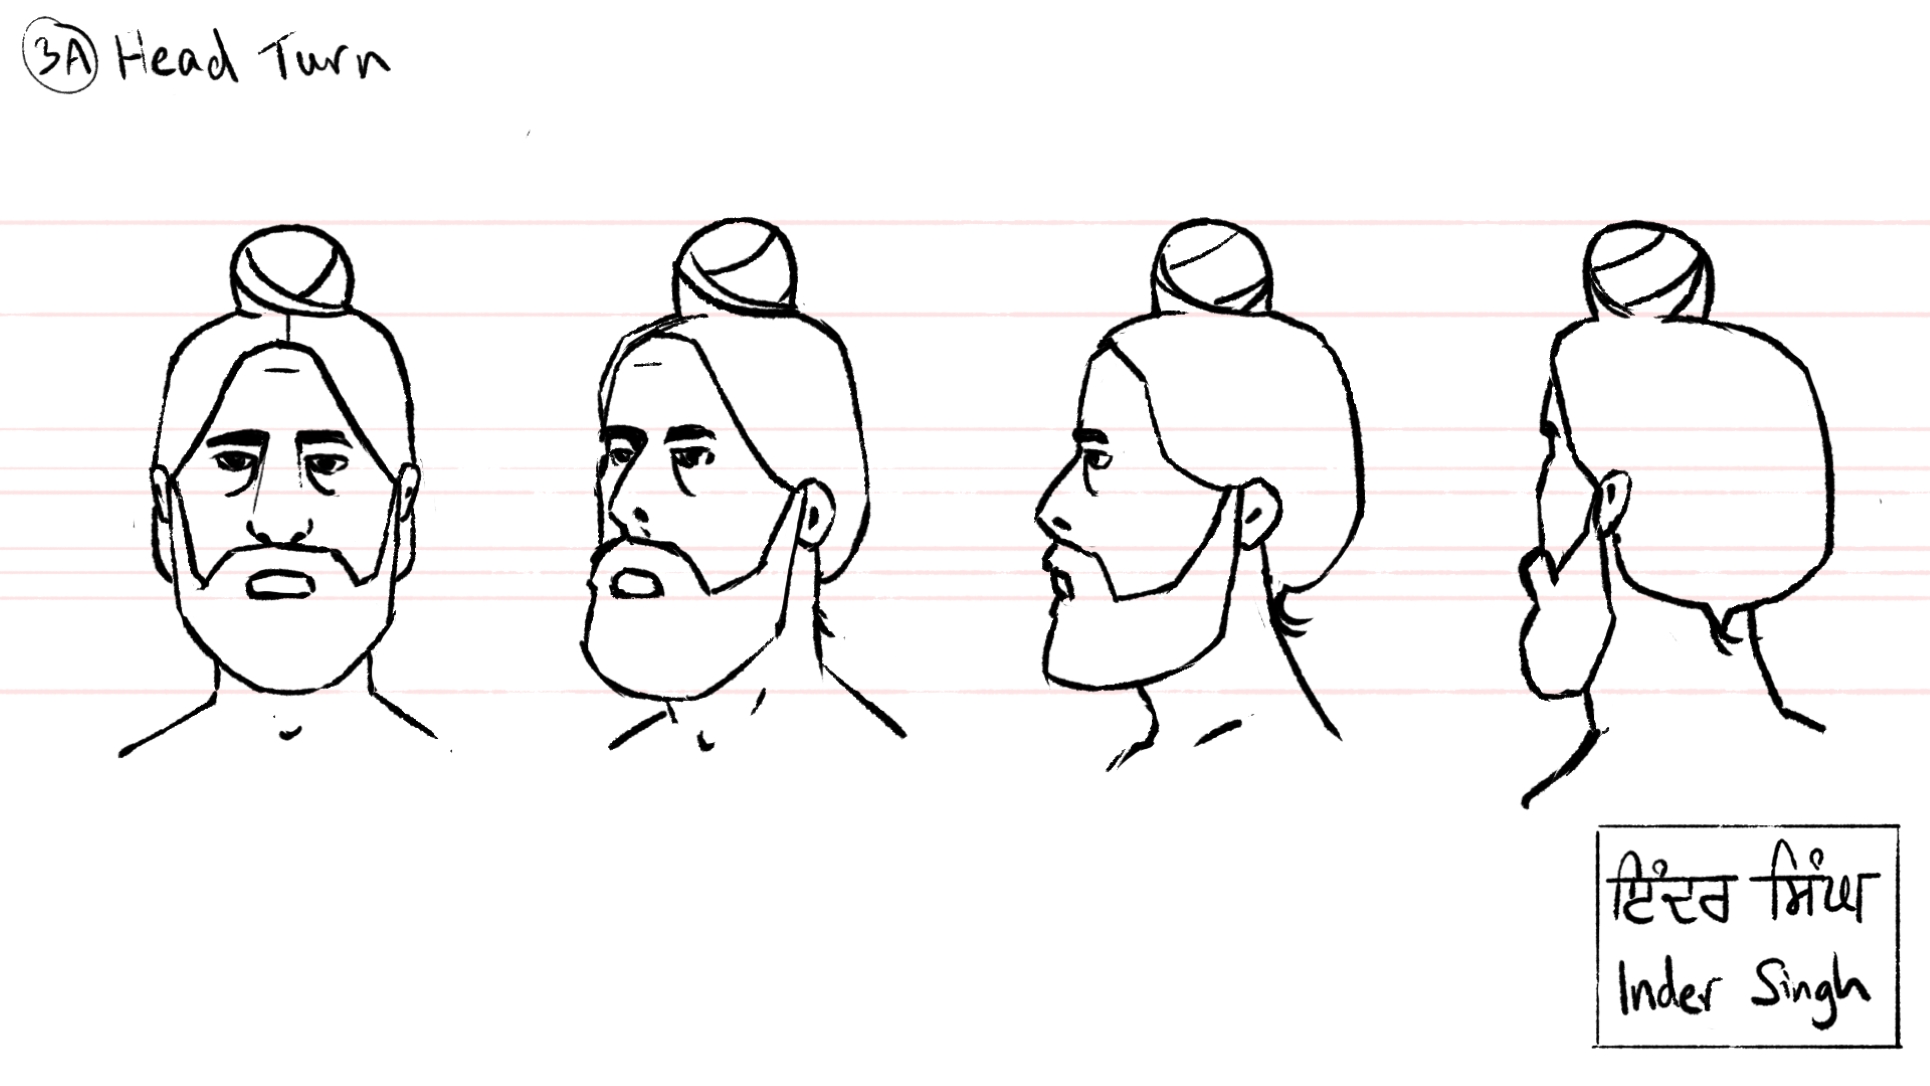 Character Head Turn - Without Turban